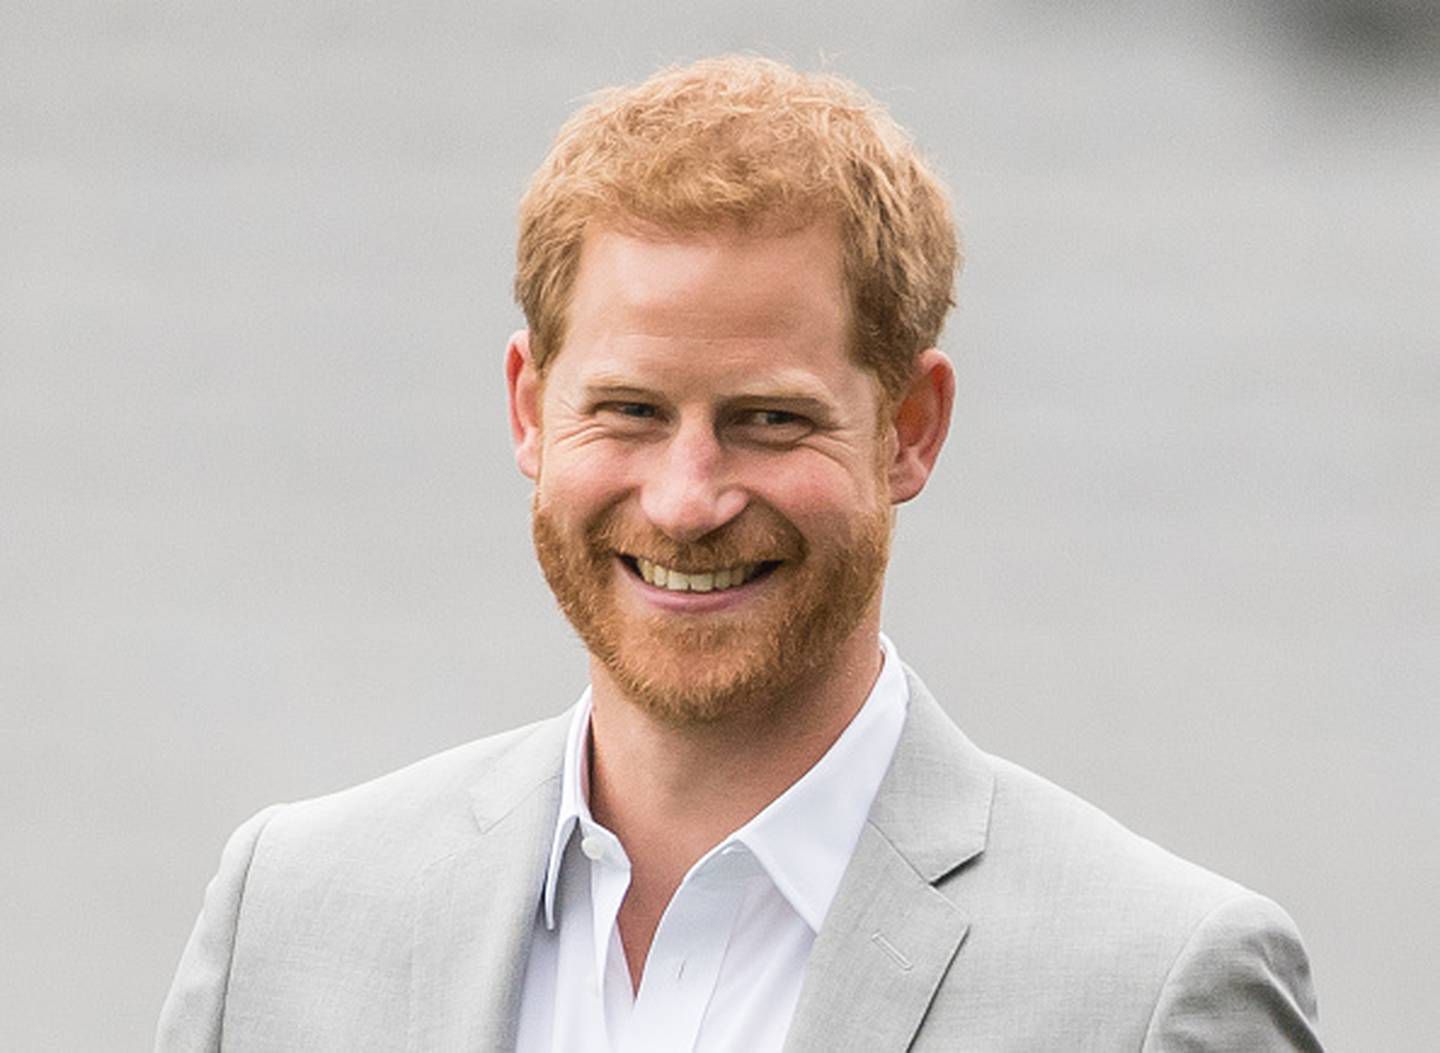 Woman Catfished to Marry Prince Harry Seeks Legal Action